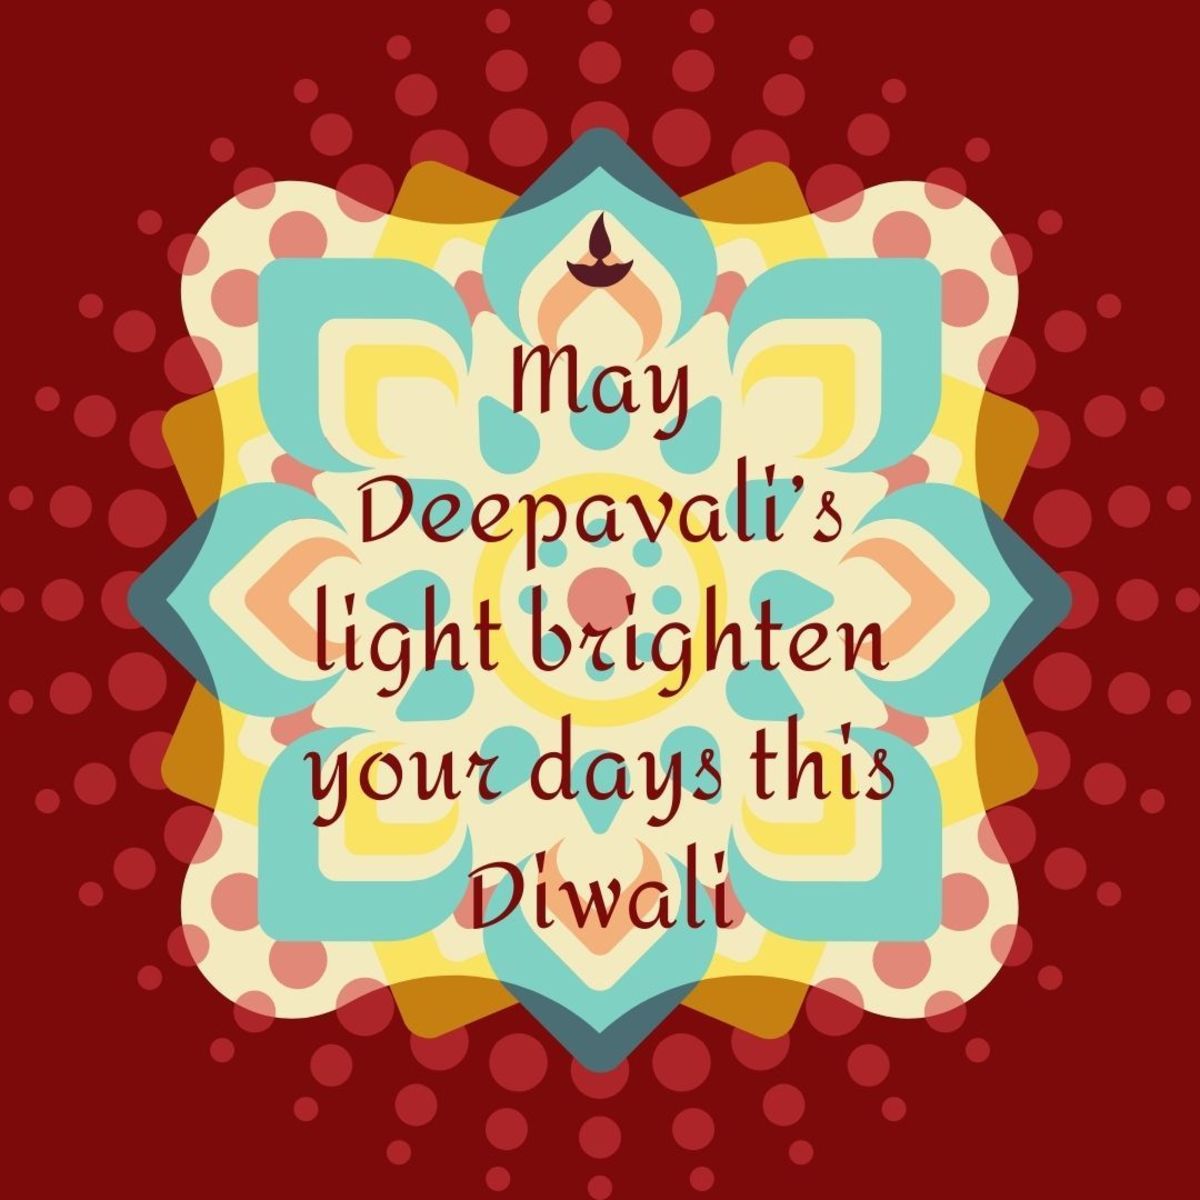 Typical happy Diwali greetings and wishes